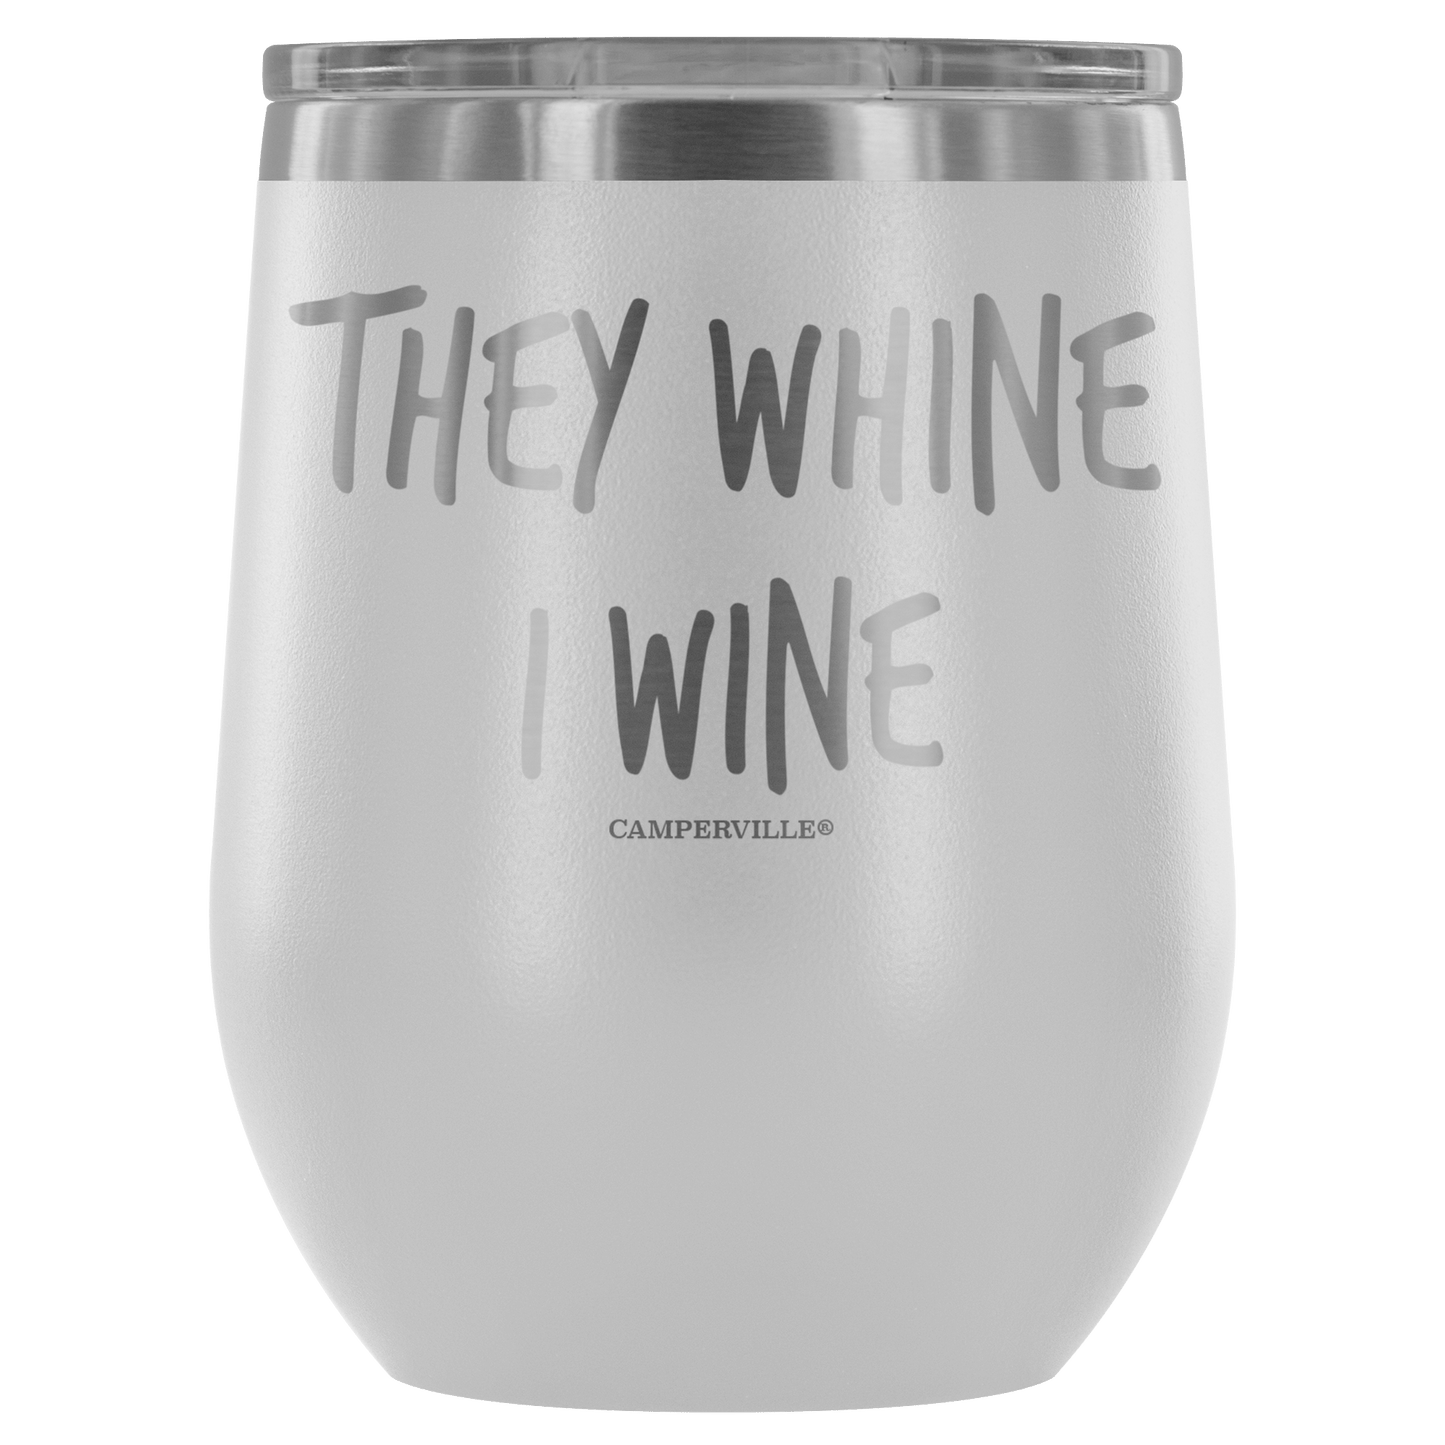 "They Whine I Wine" - Stainless Steel Cup